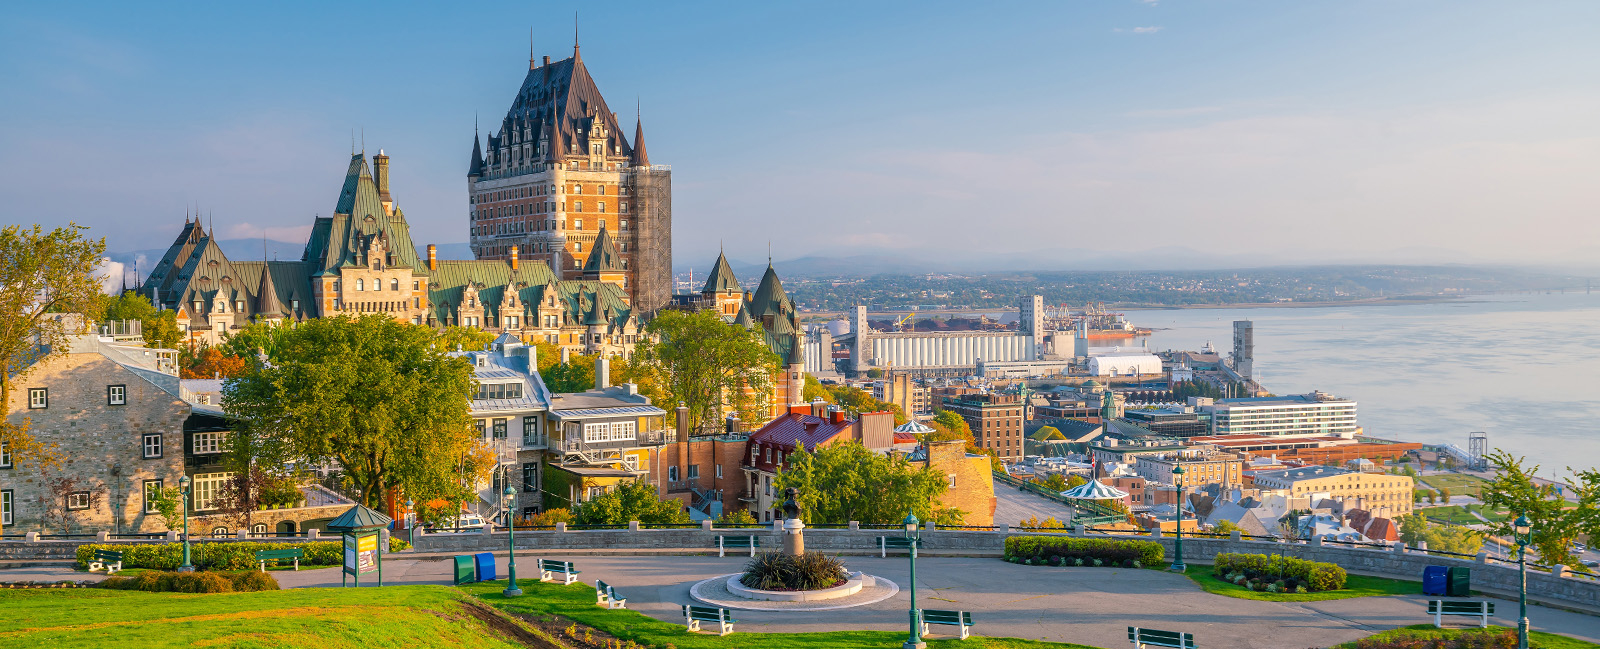 panoramic-view-quebec-city-skyline-with-saint-lawrence-river-canada